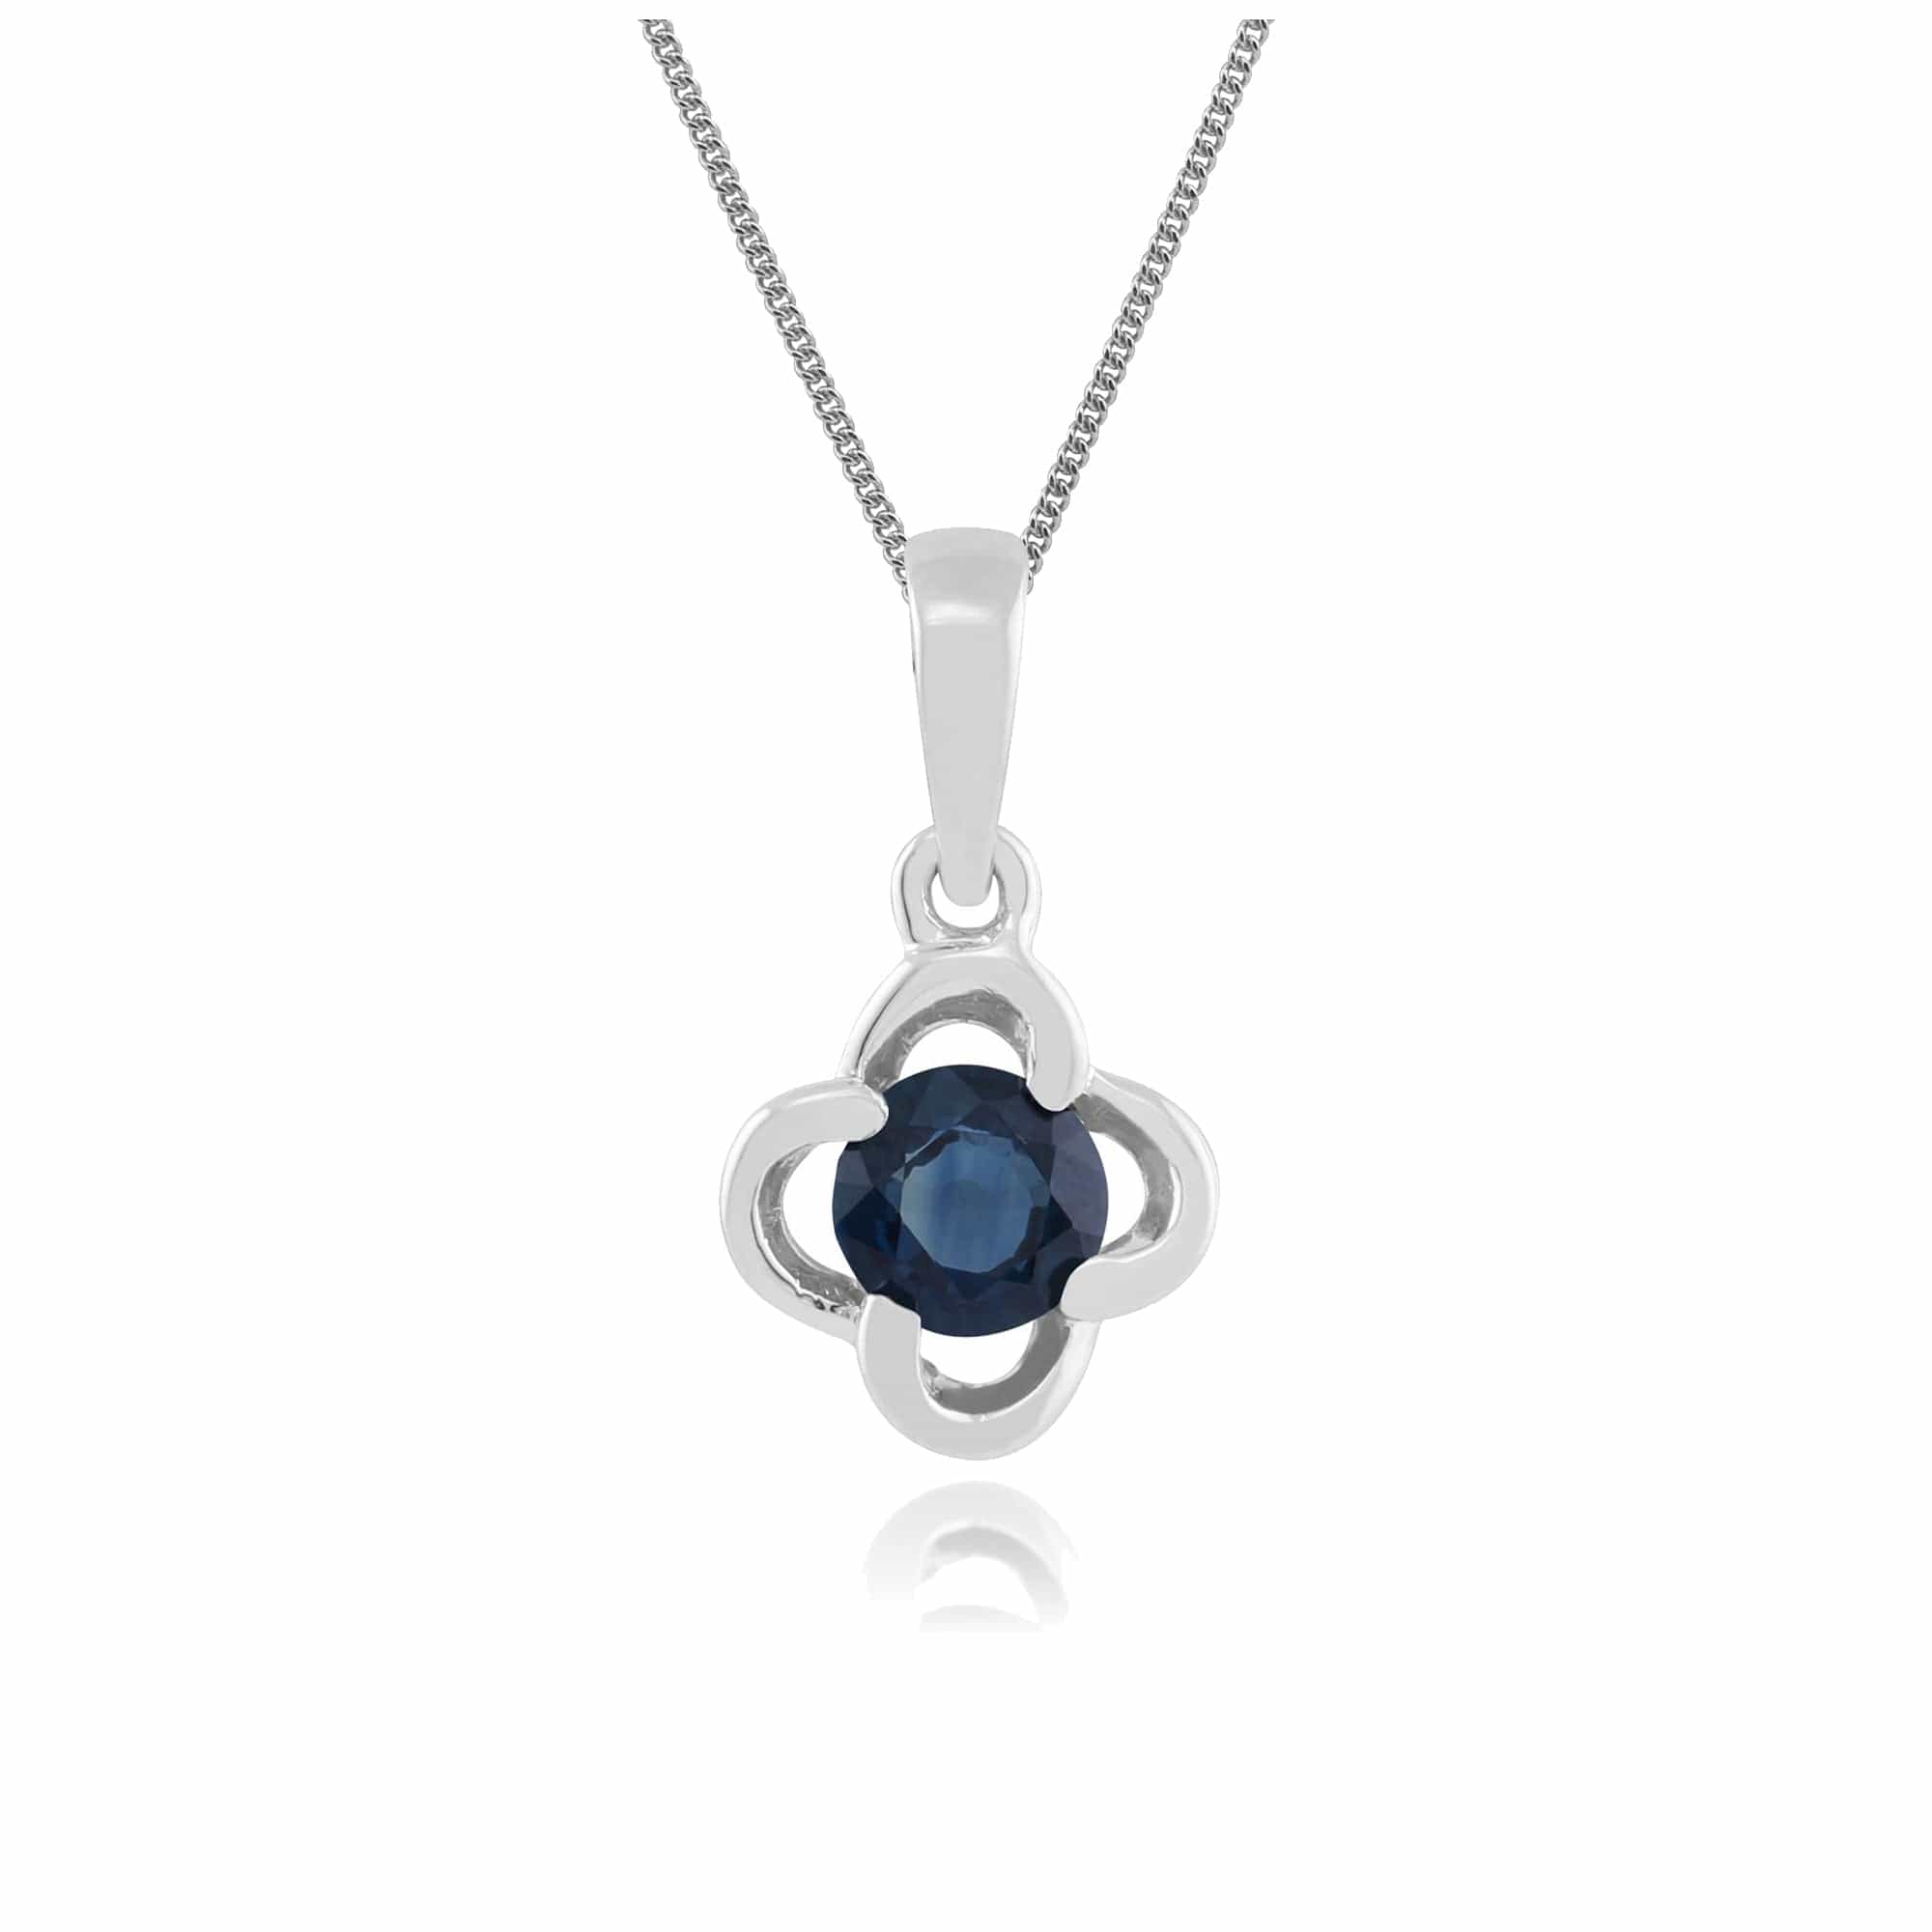 Photos - Pendant / Choker Necklace Floral Round Sapphire Pendant in 9ct White Gold